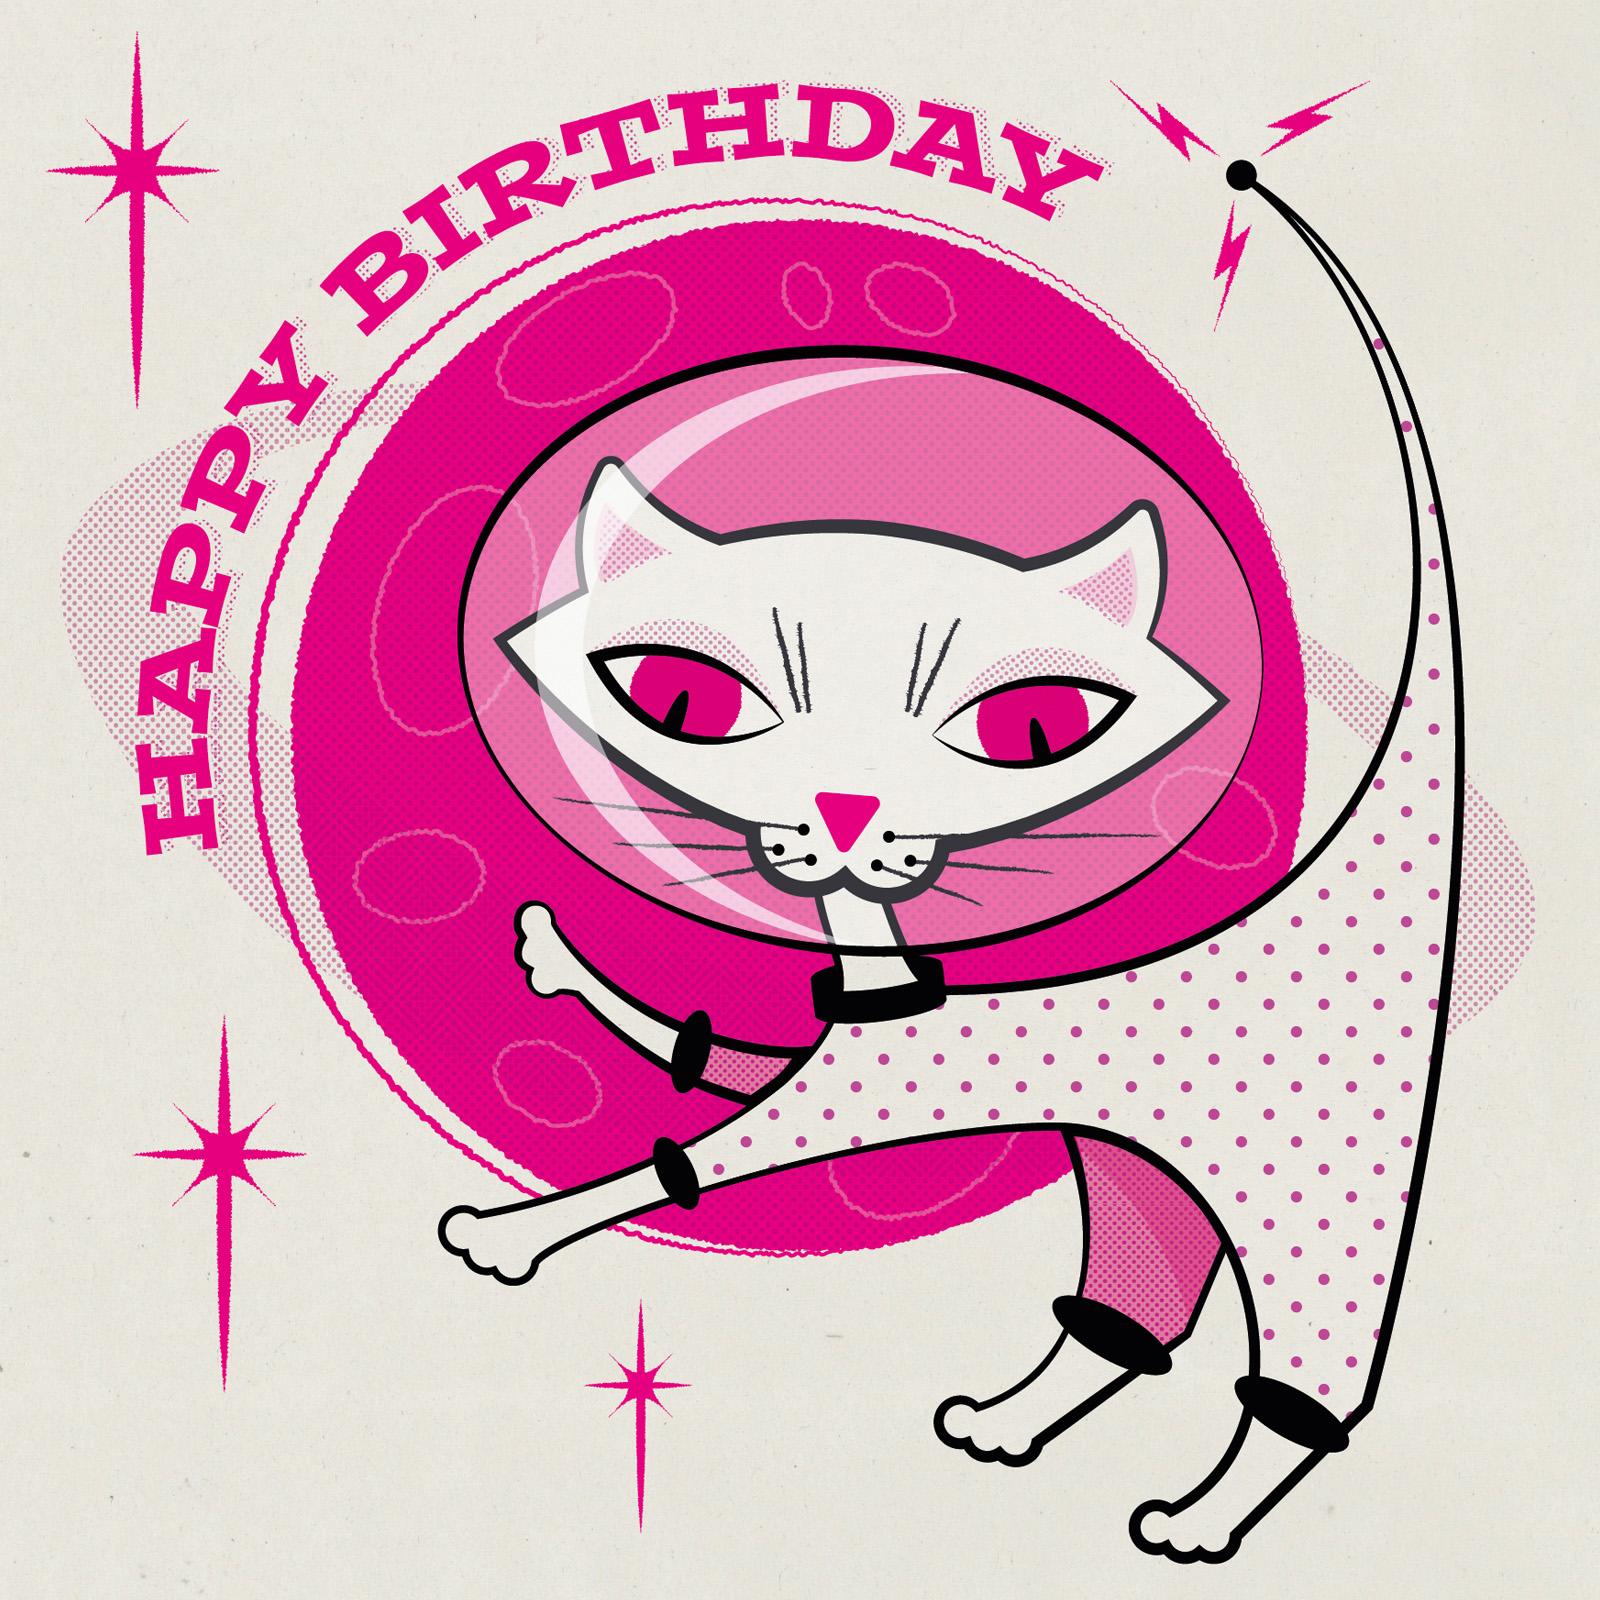 1950s cartoon style cat in a spacesuit in front of a planet in an orange and black palette with the words happy birthday in a retro 50s-style font